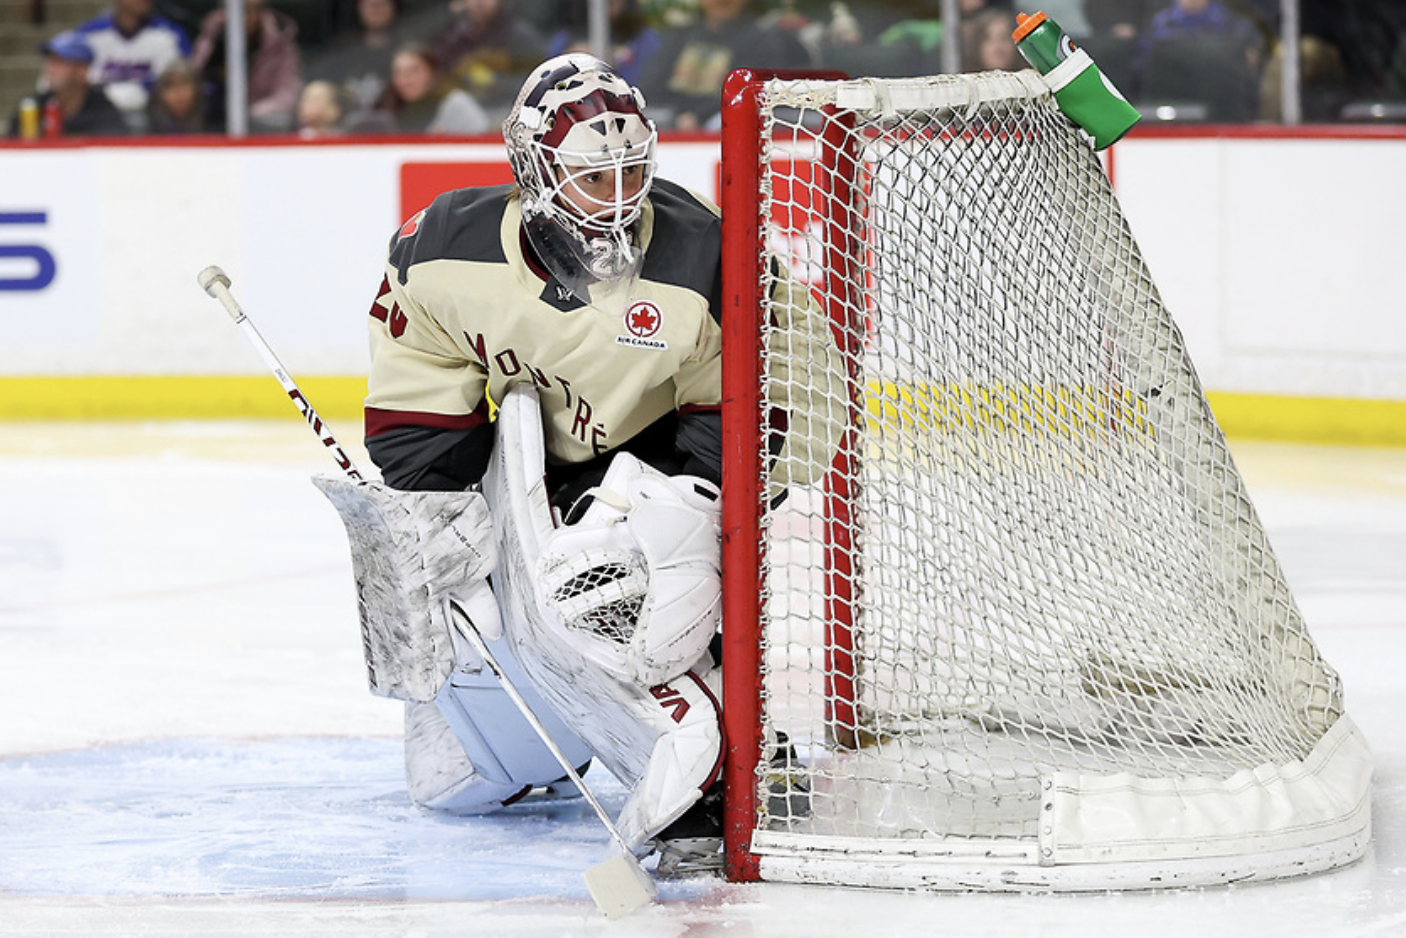 Chuli crouches while tracking the puck behind the net. She is wearing a cream away iniform, white pads, and a maroon and off-white mask.